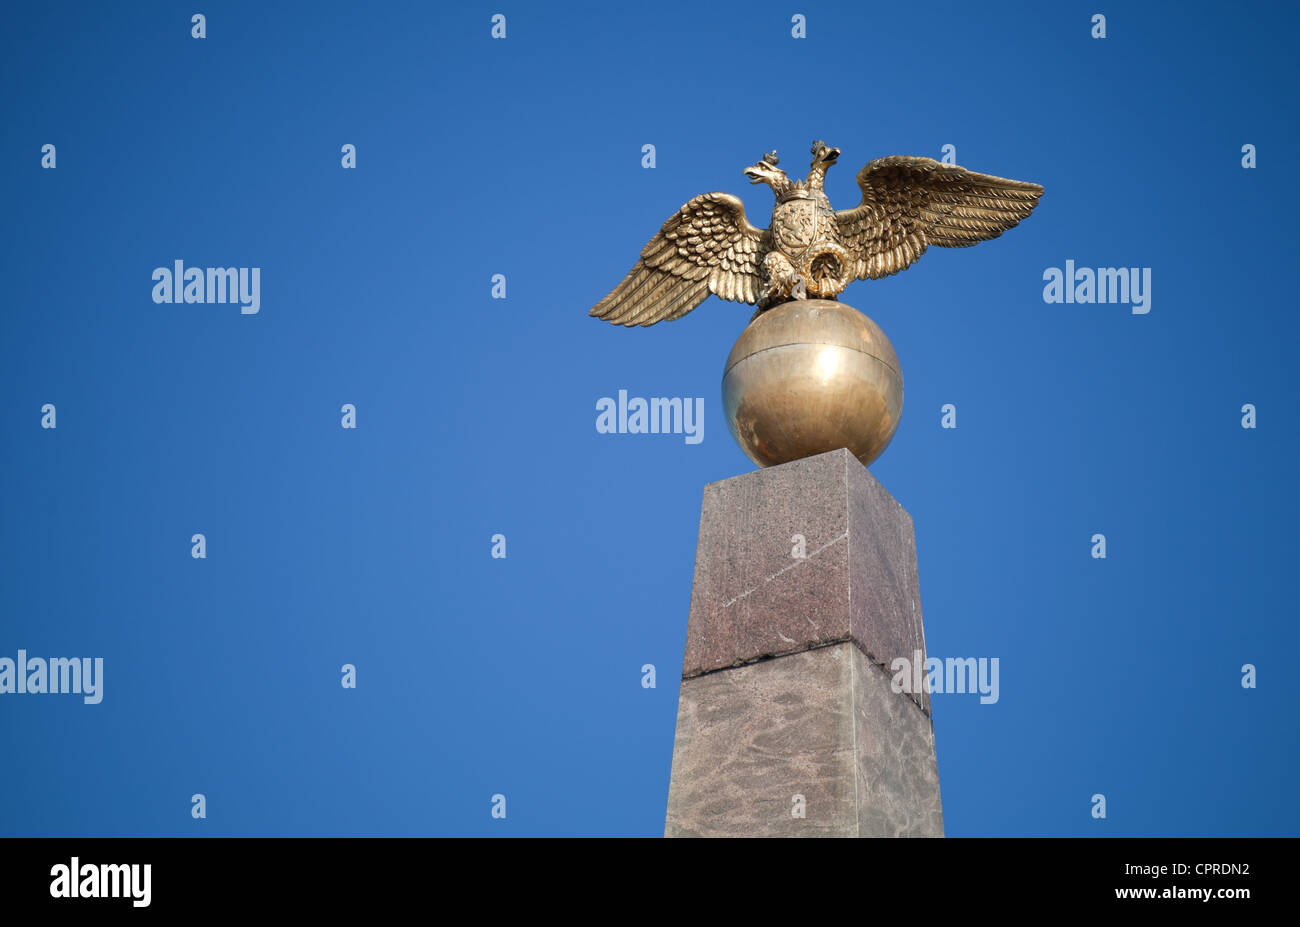 Double Eagle - Emblem of Russia on the monument in Helsinki, Finland Stock Photo